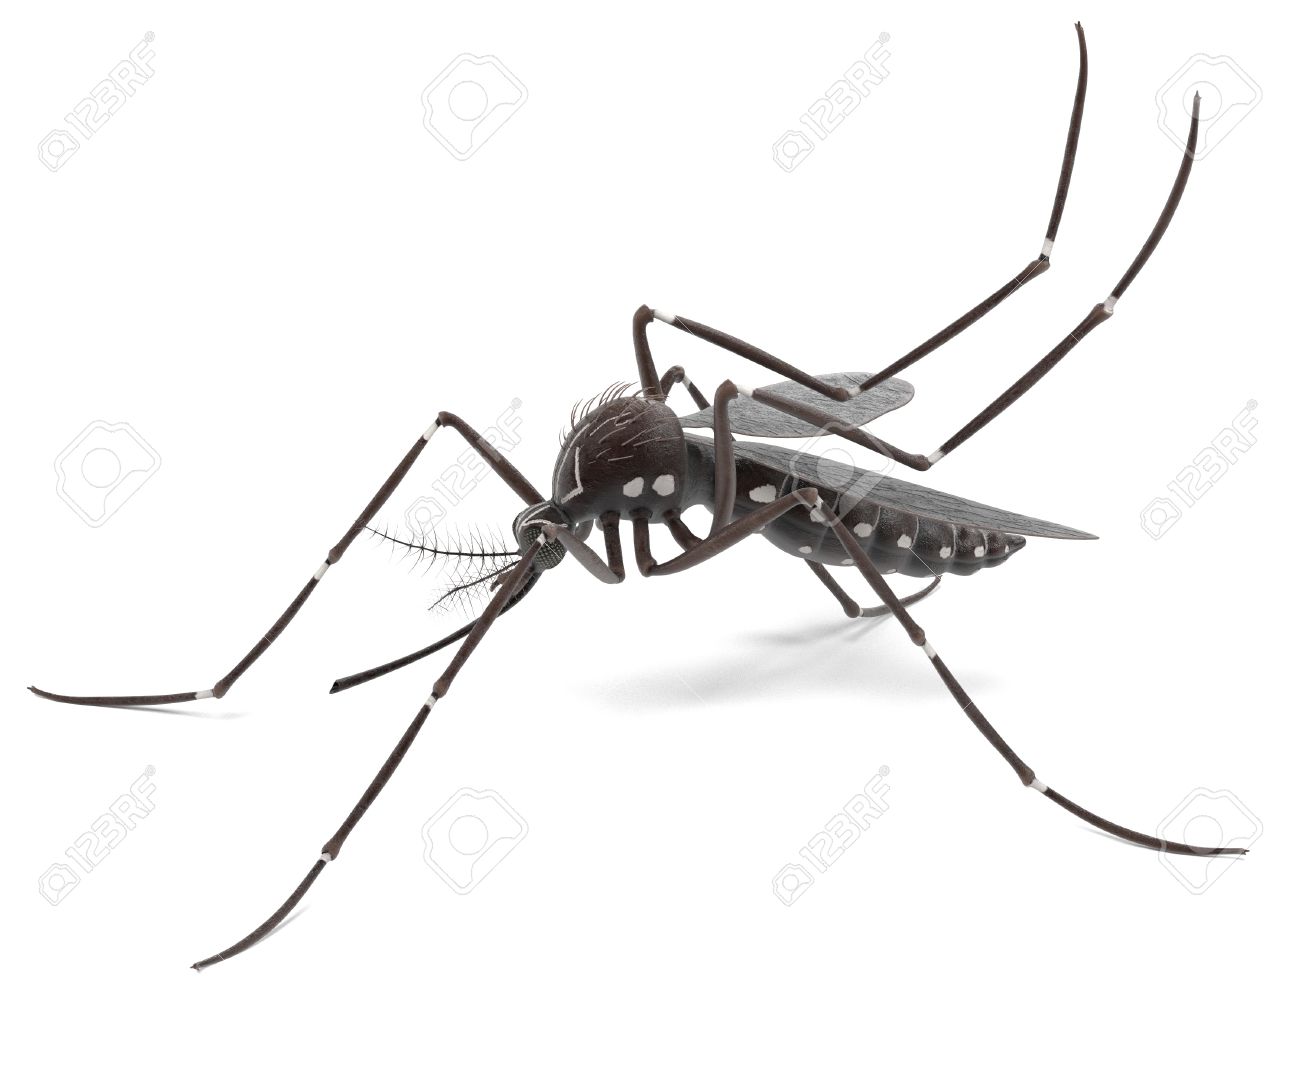 3d Render Of Aedes Aegypti Stock Photo, Picture And Royalty Free.